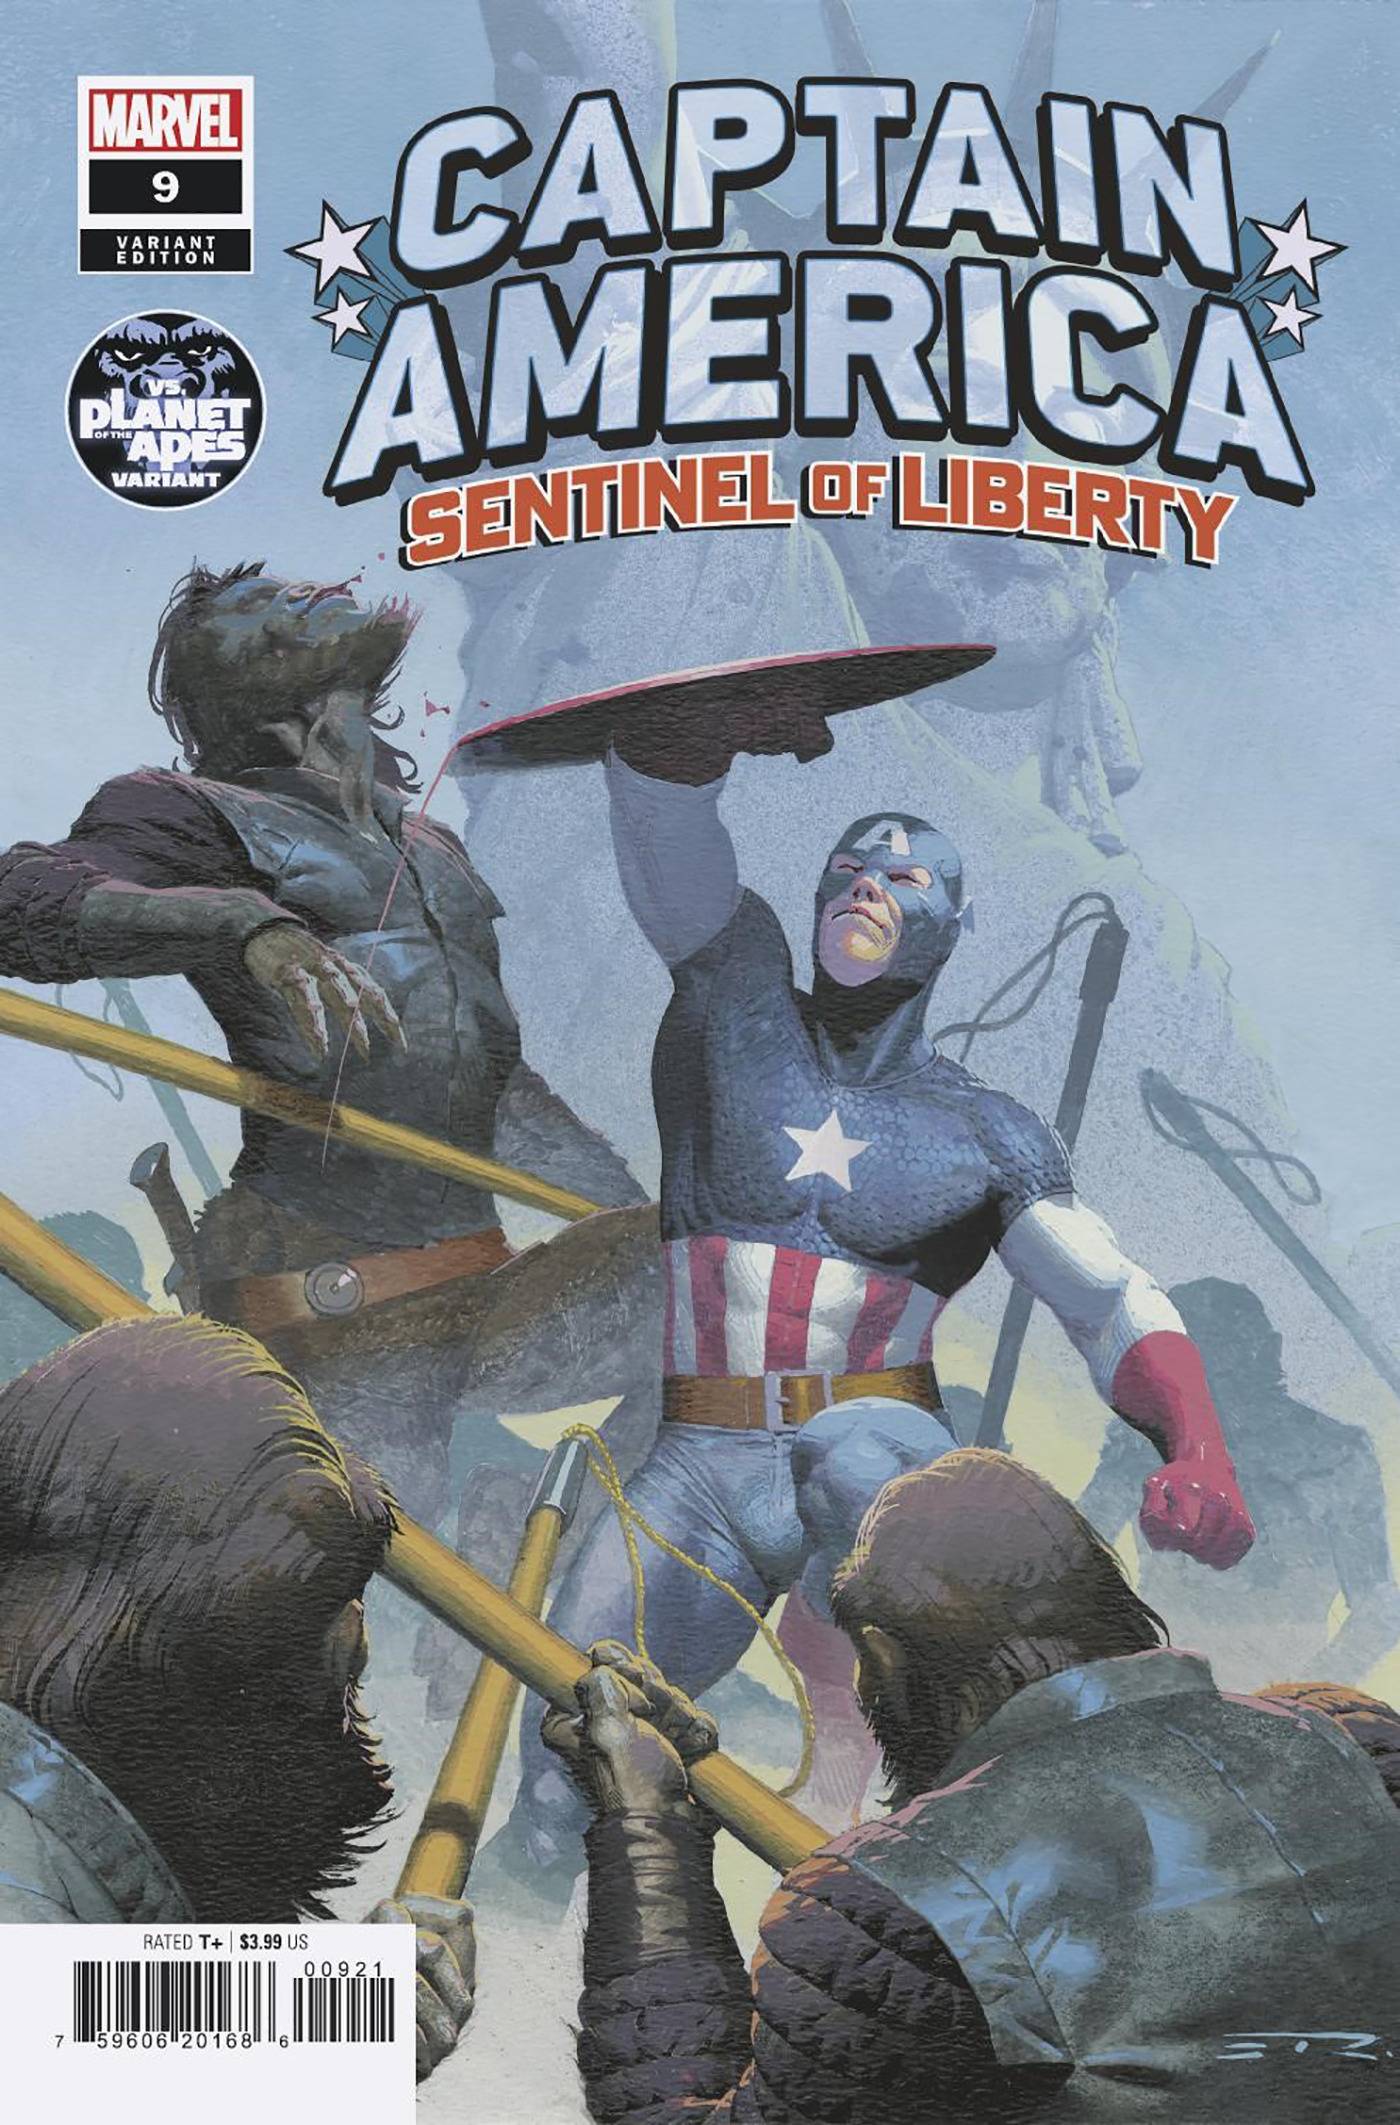 CAPTAIN AMERICA SENTINEL OF LIBERTY #9 PLANET OF THE APES VA